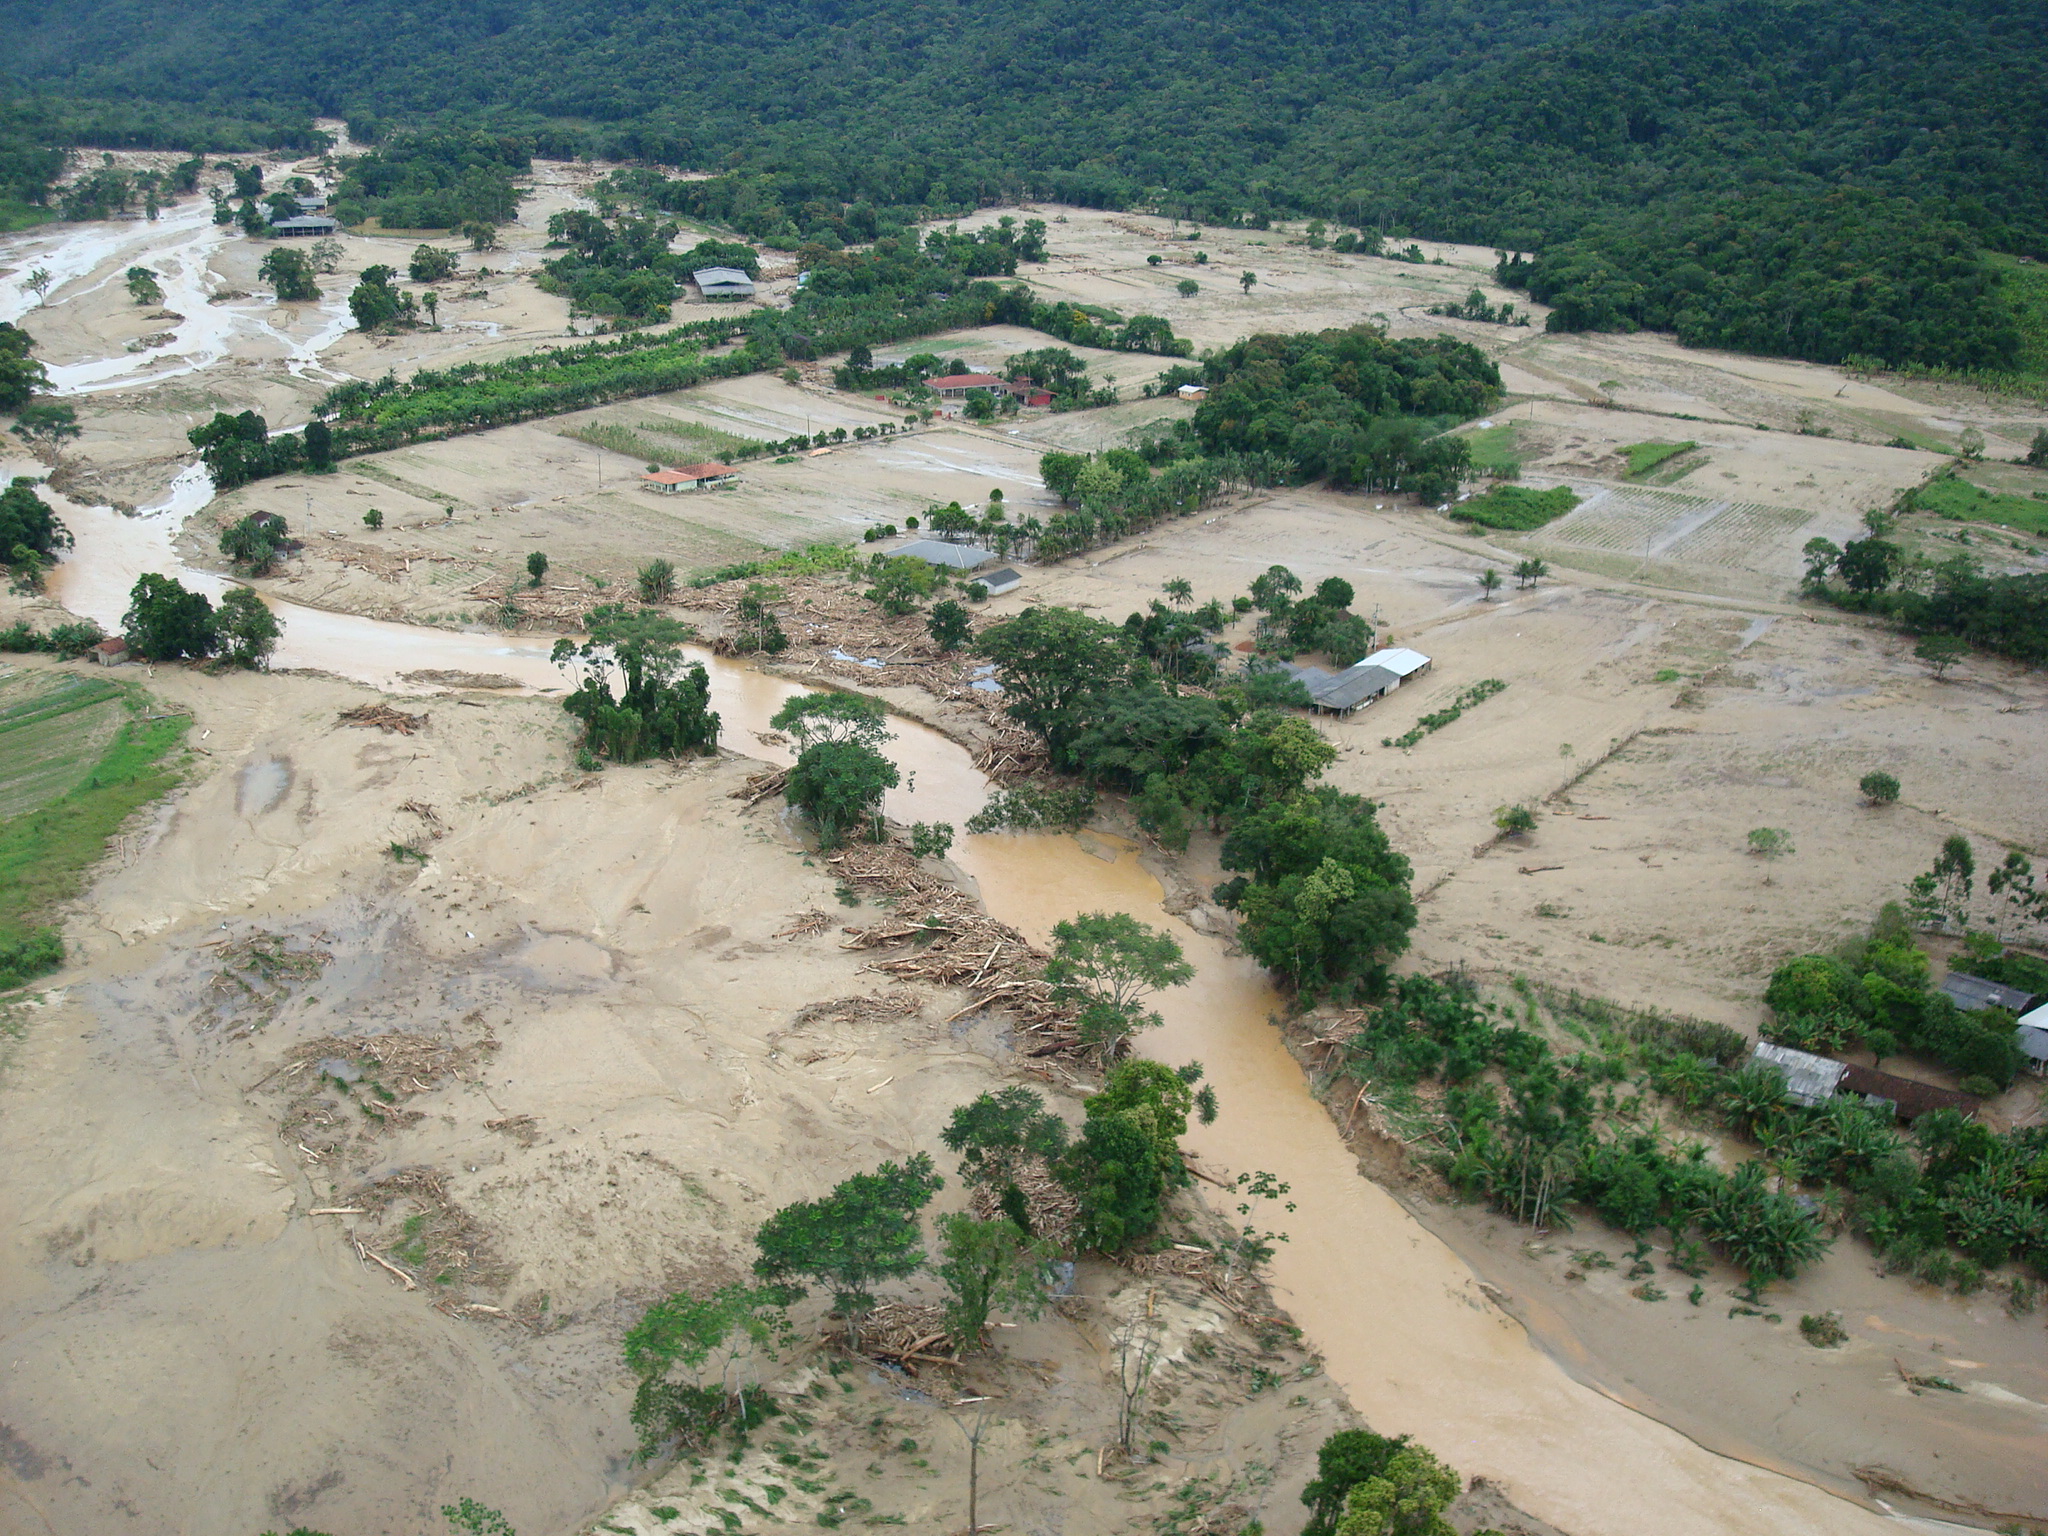 Downstream inundation and deposition damage caused by the March 2011 rainfall event at Antonina and Morretes in Brazil